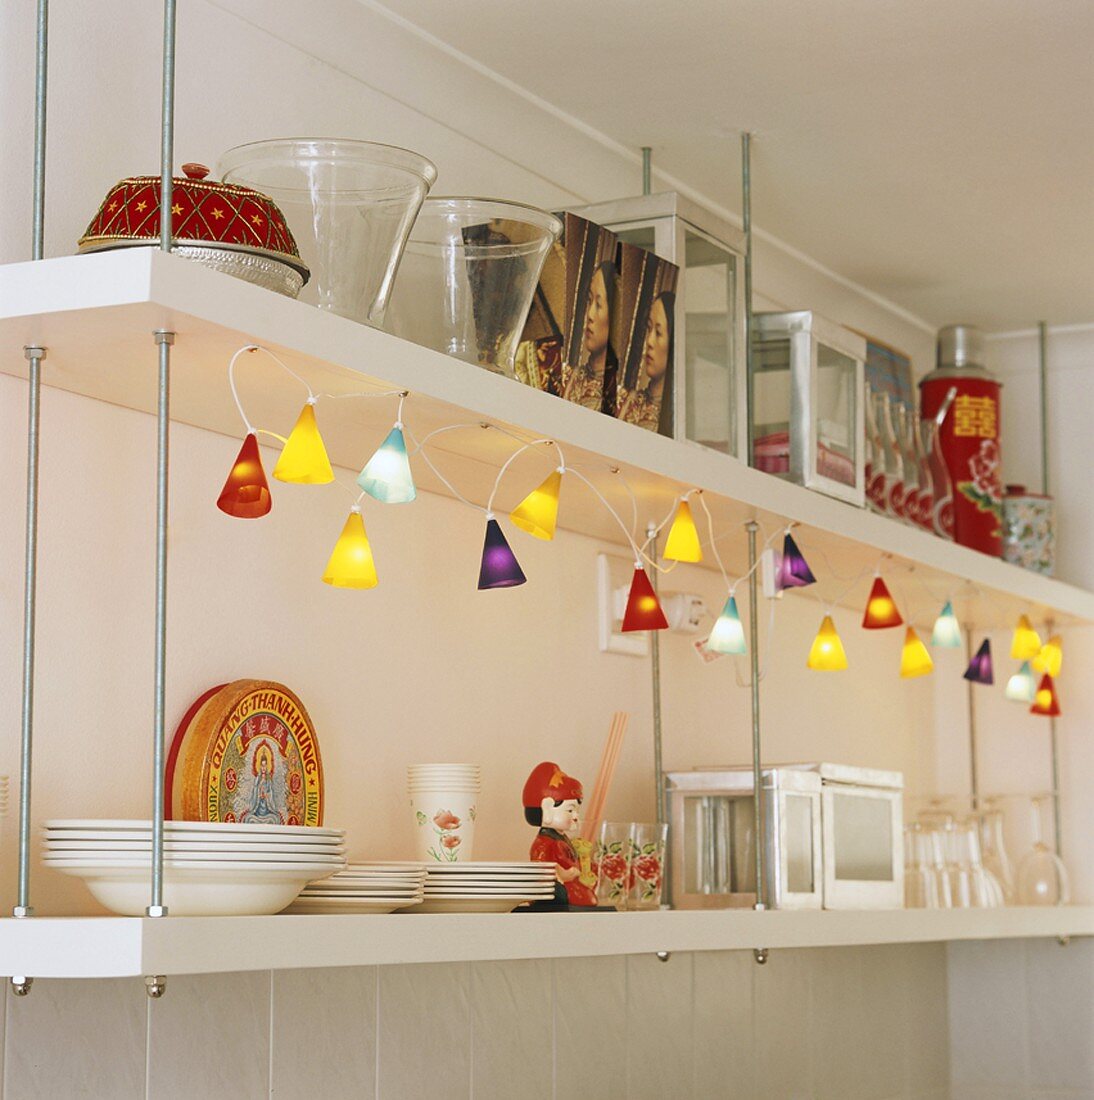 Shelving with lamps